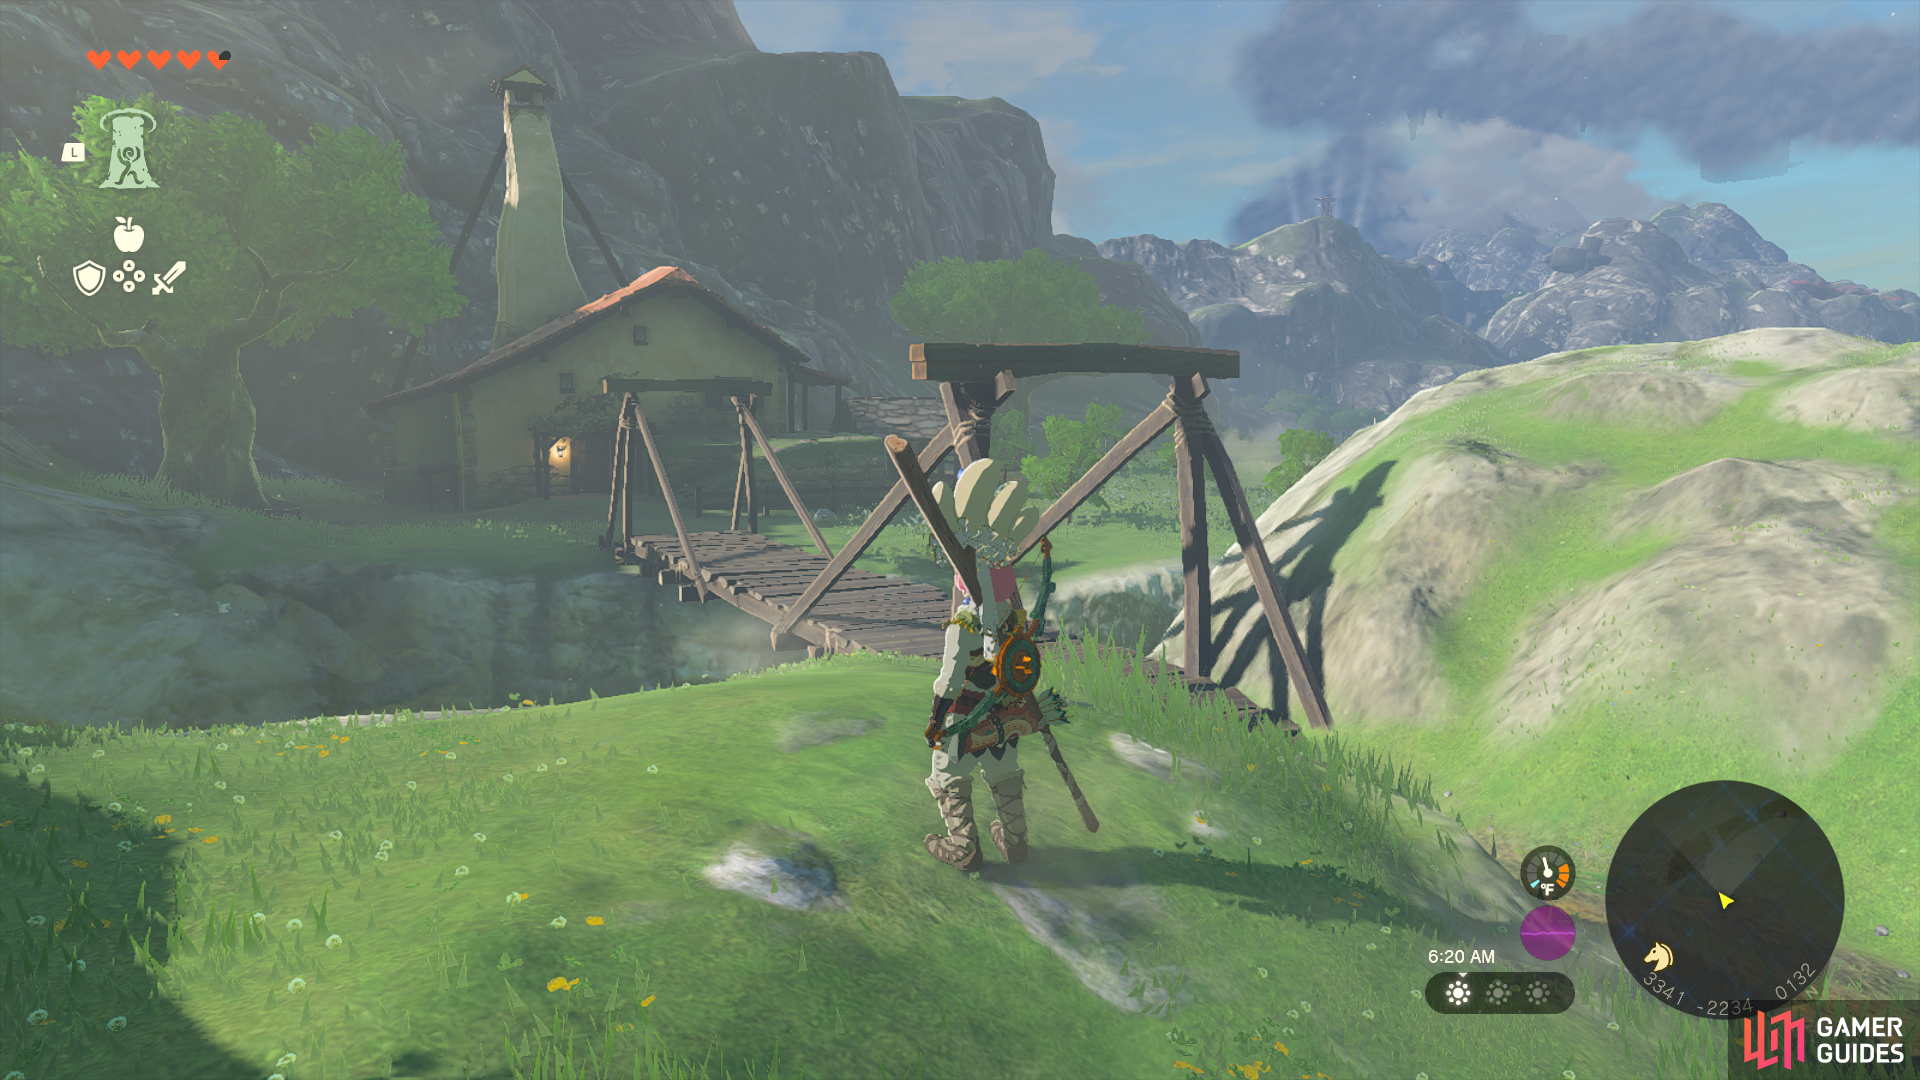 Zelda has moved into Link’s house in Hateno Village.